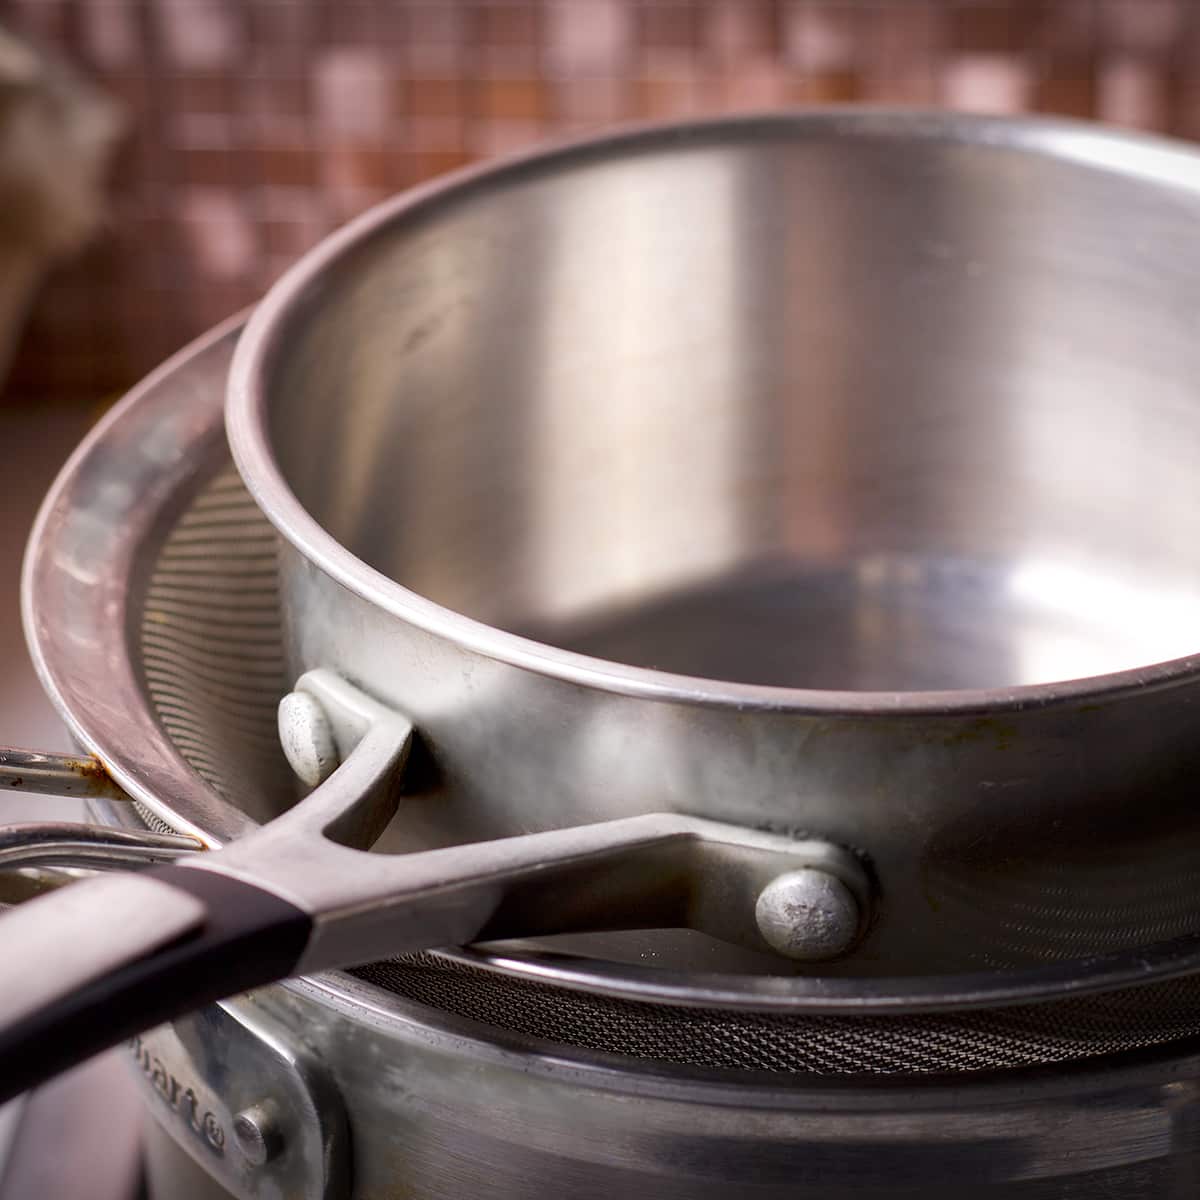 Two saucepans, one medium and one small, and a fine mesh strainer to create a double boiler.